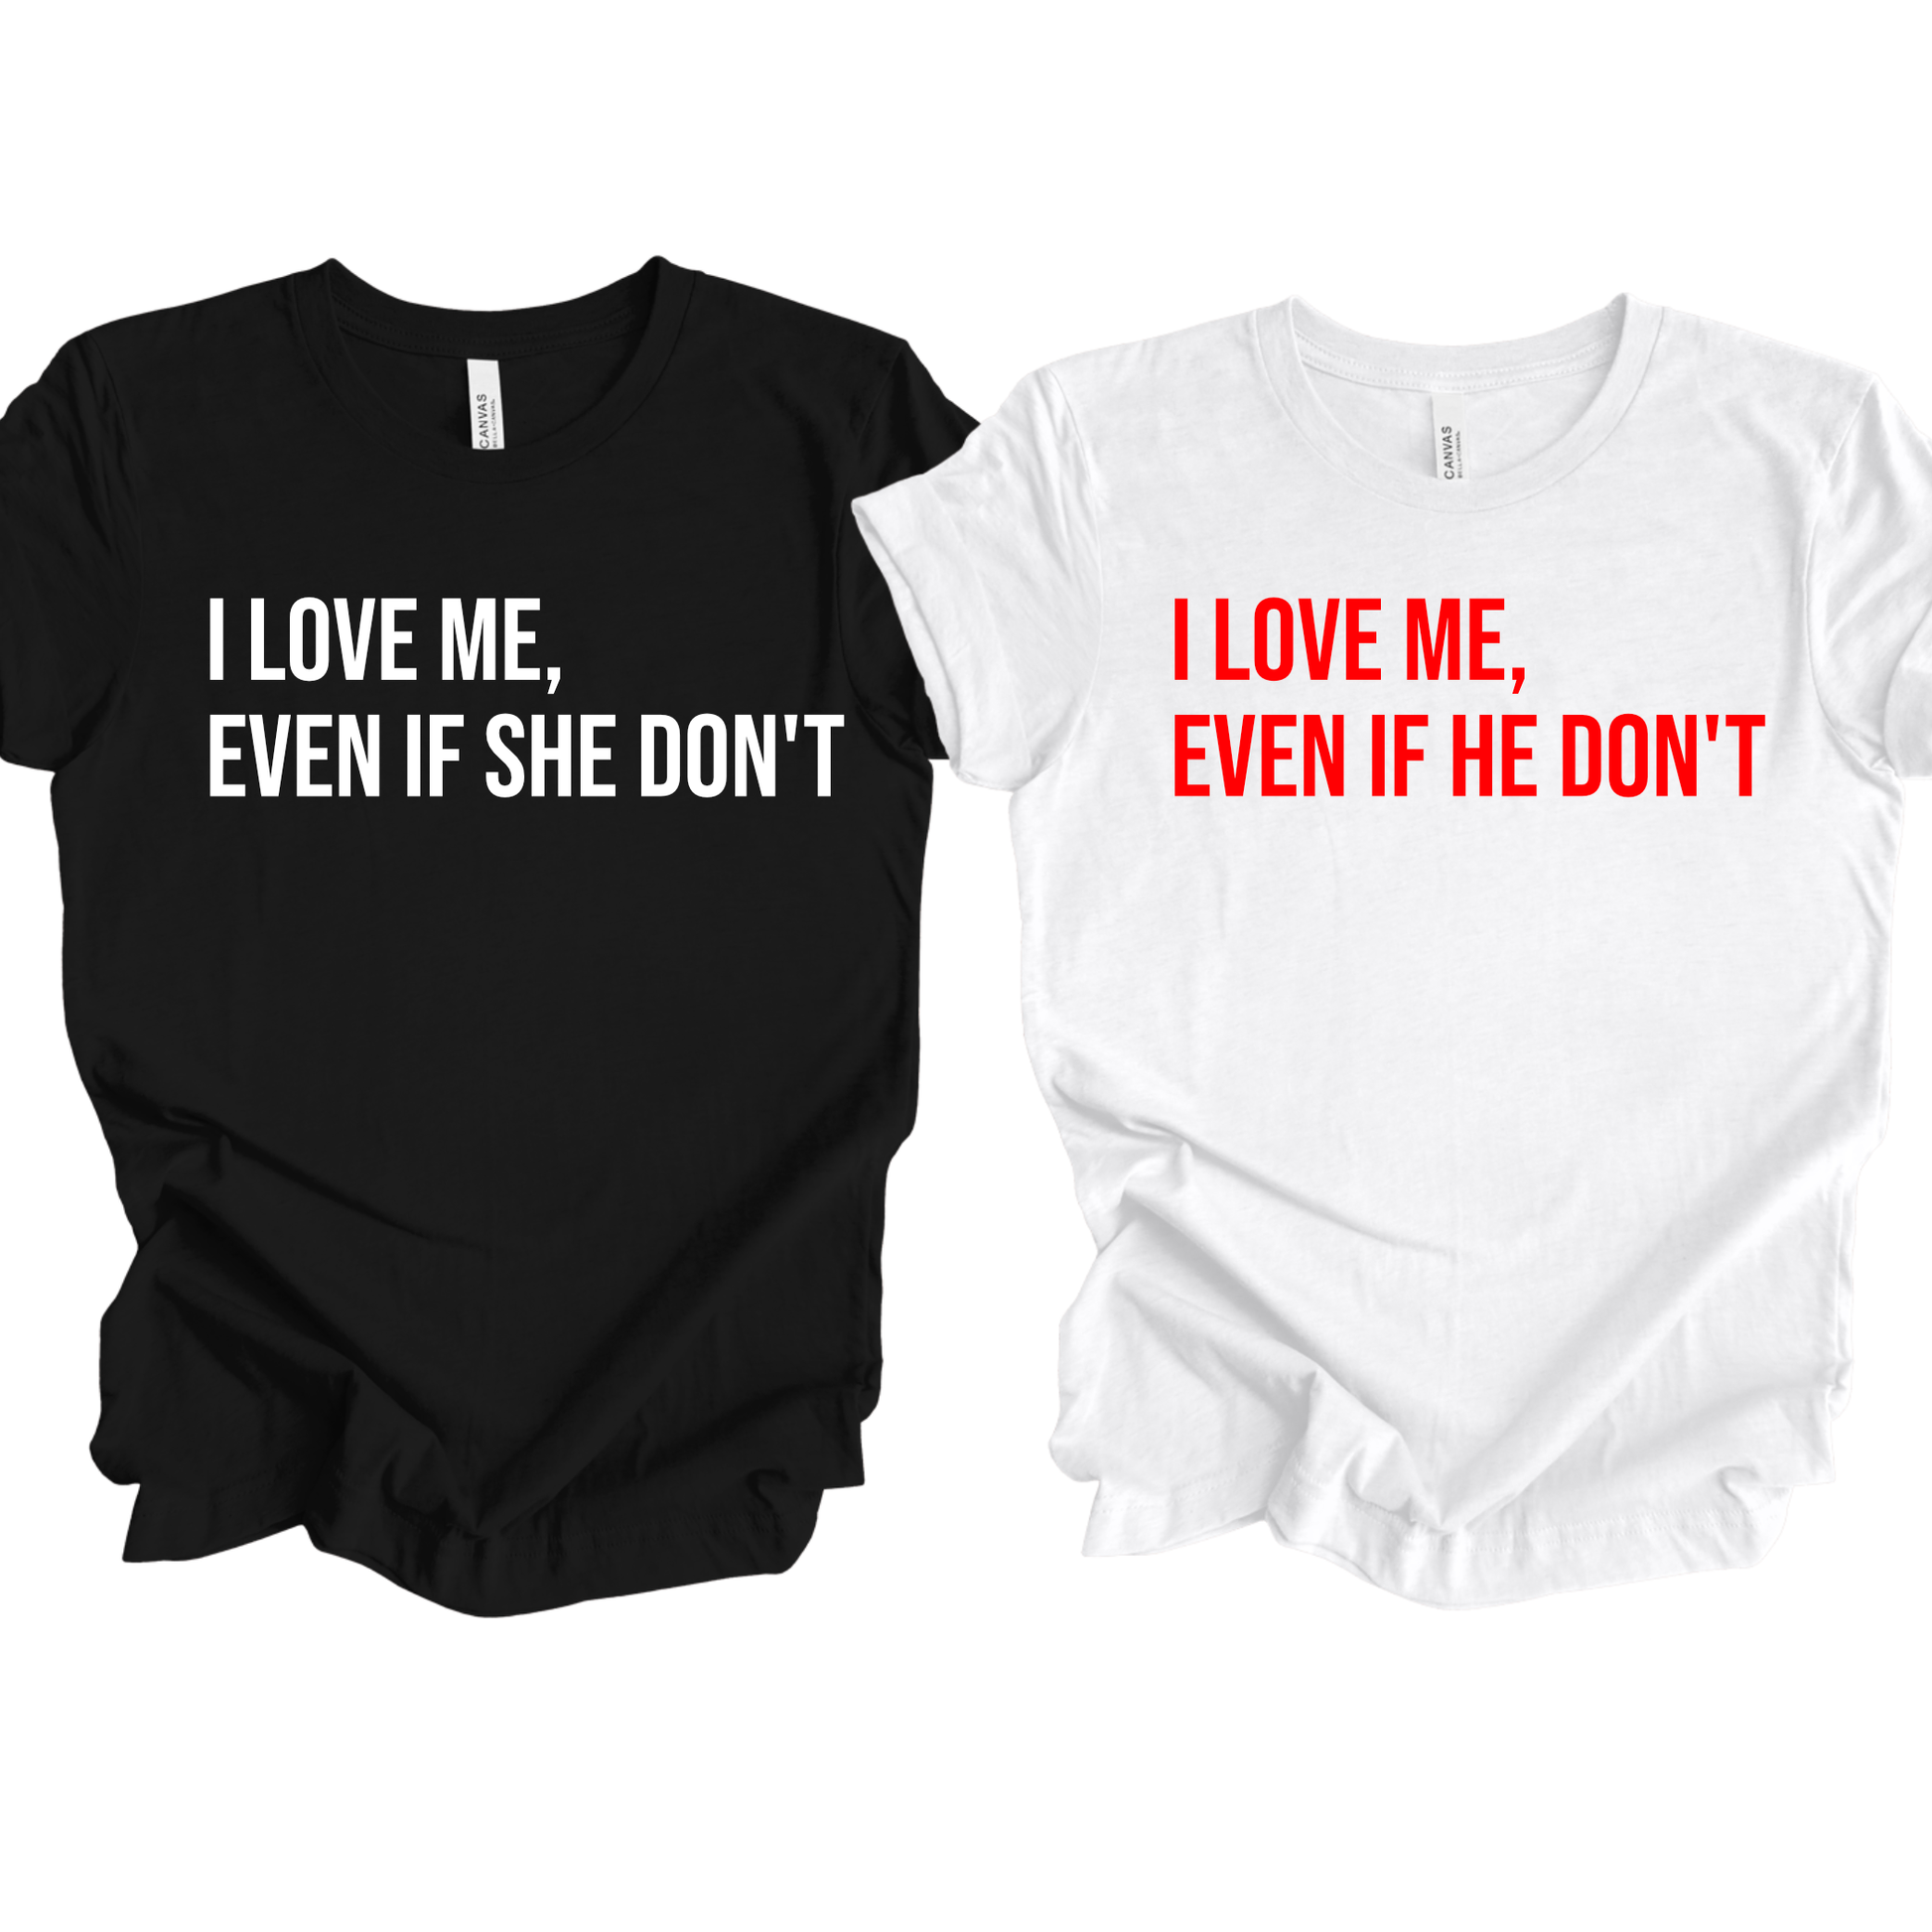 Divorce Shirts Collection 1 Custom Shirts Bambi Rae Collections I love me even she don't Small 